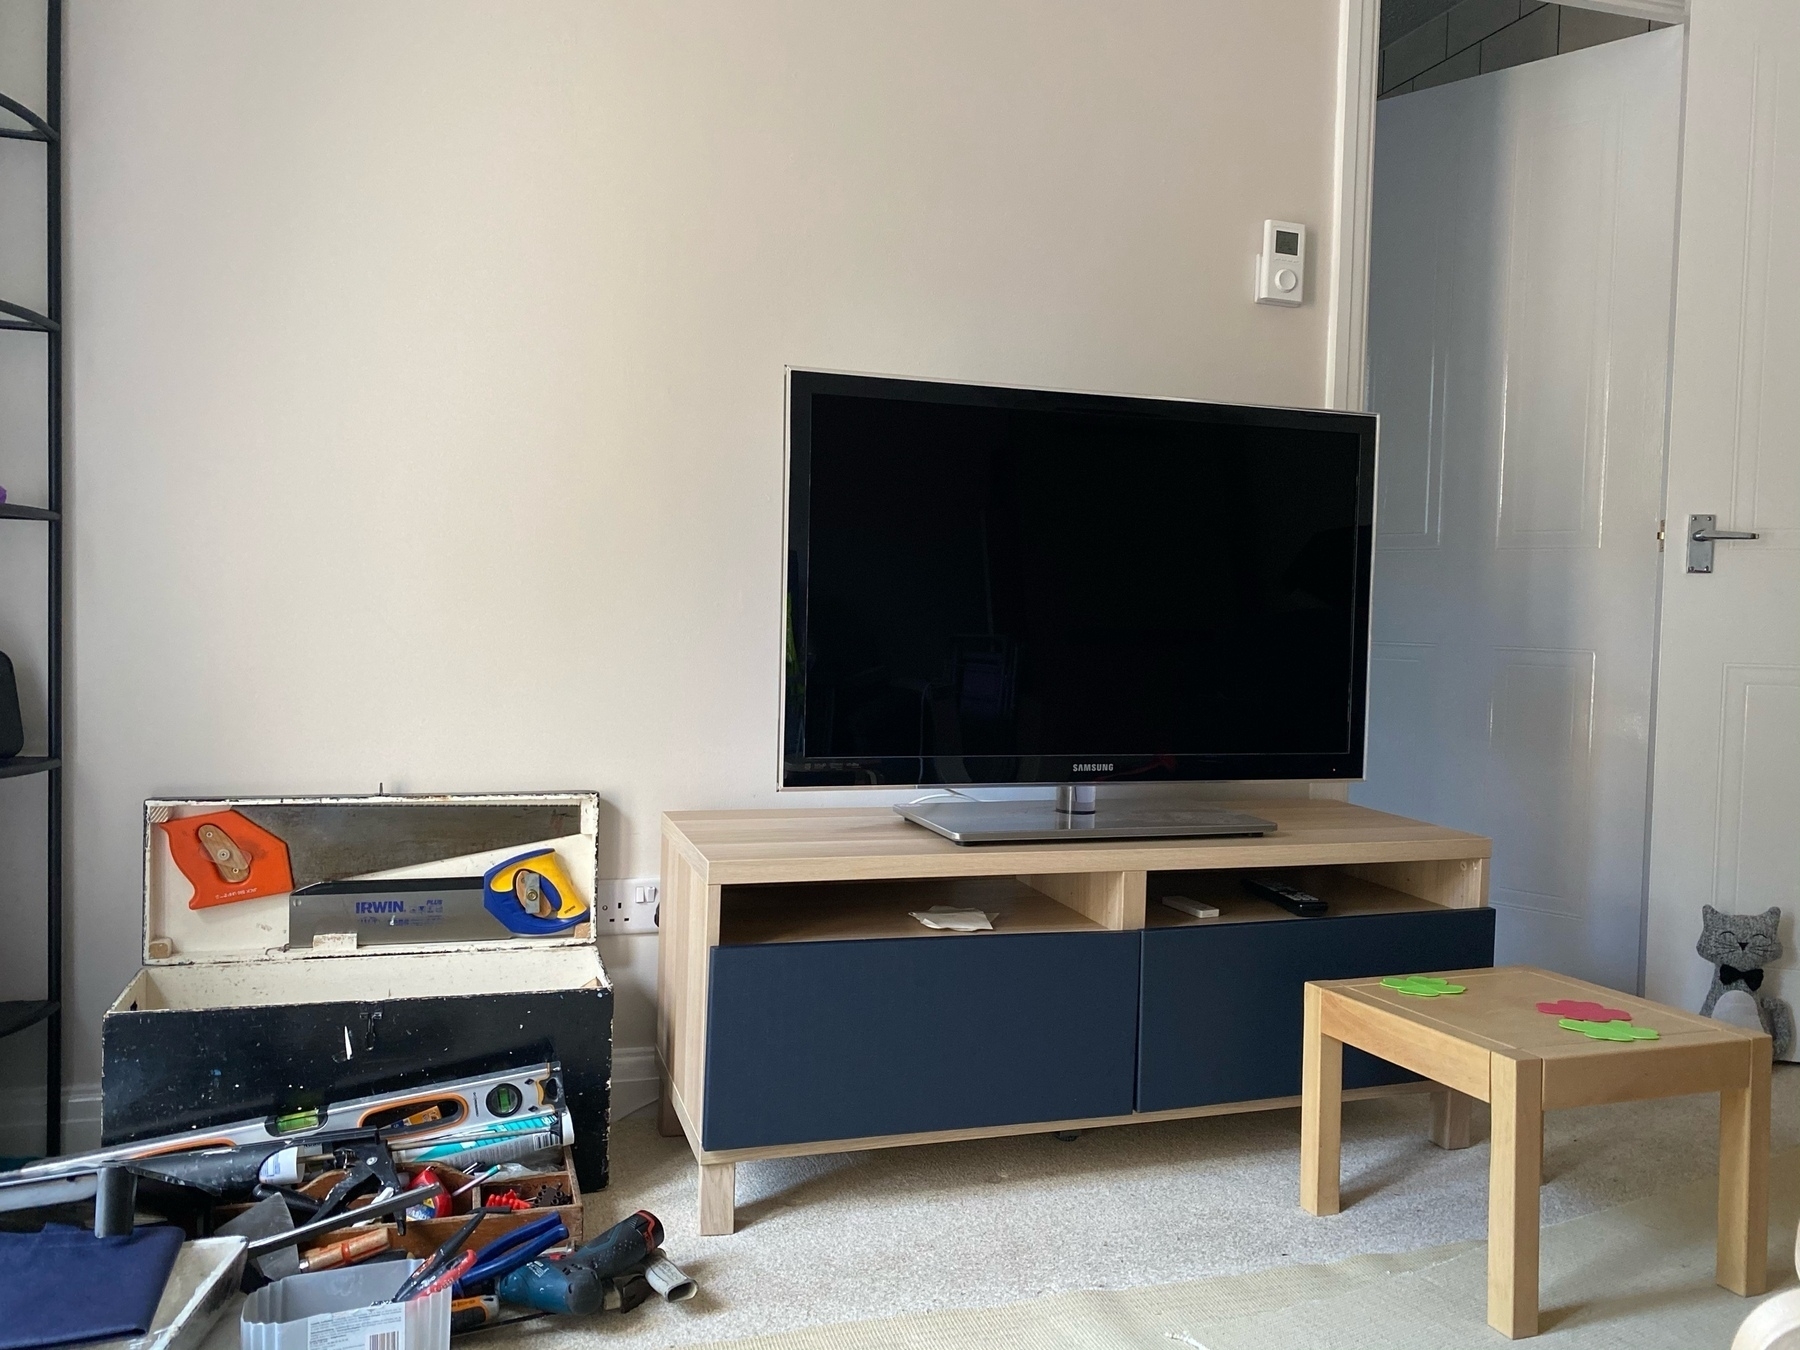 IKEA Besta TV unit with navy blue drawer fronts, TV on top. large black toolbox on the left with 2 saws in the lid. 